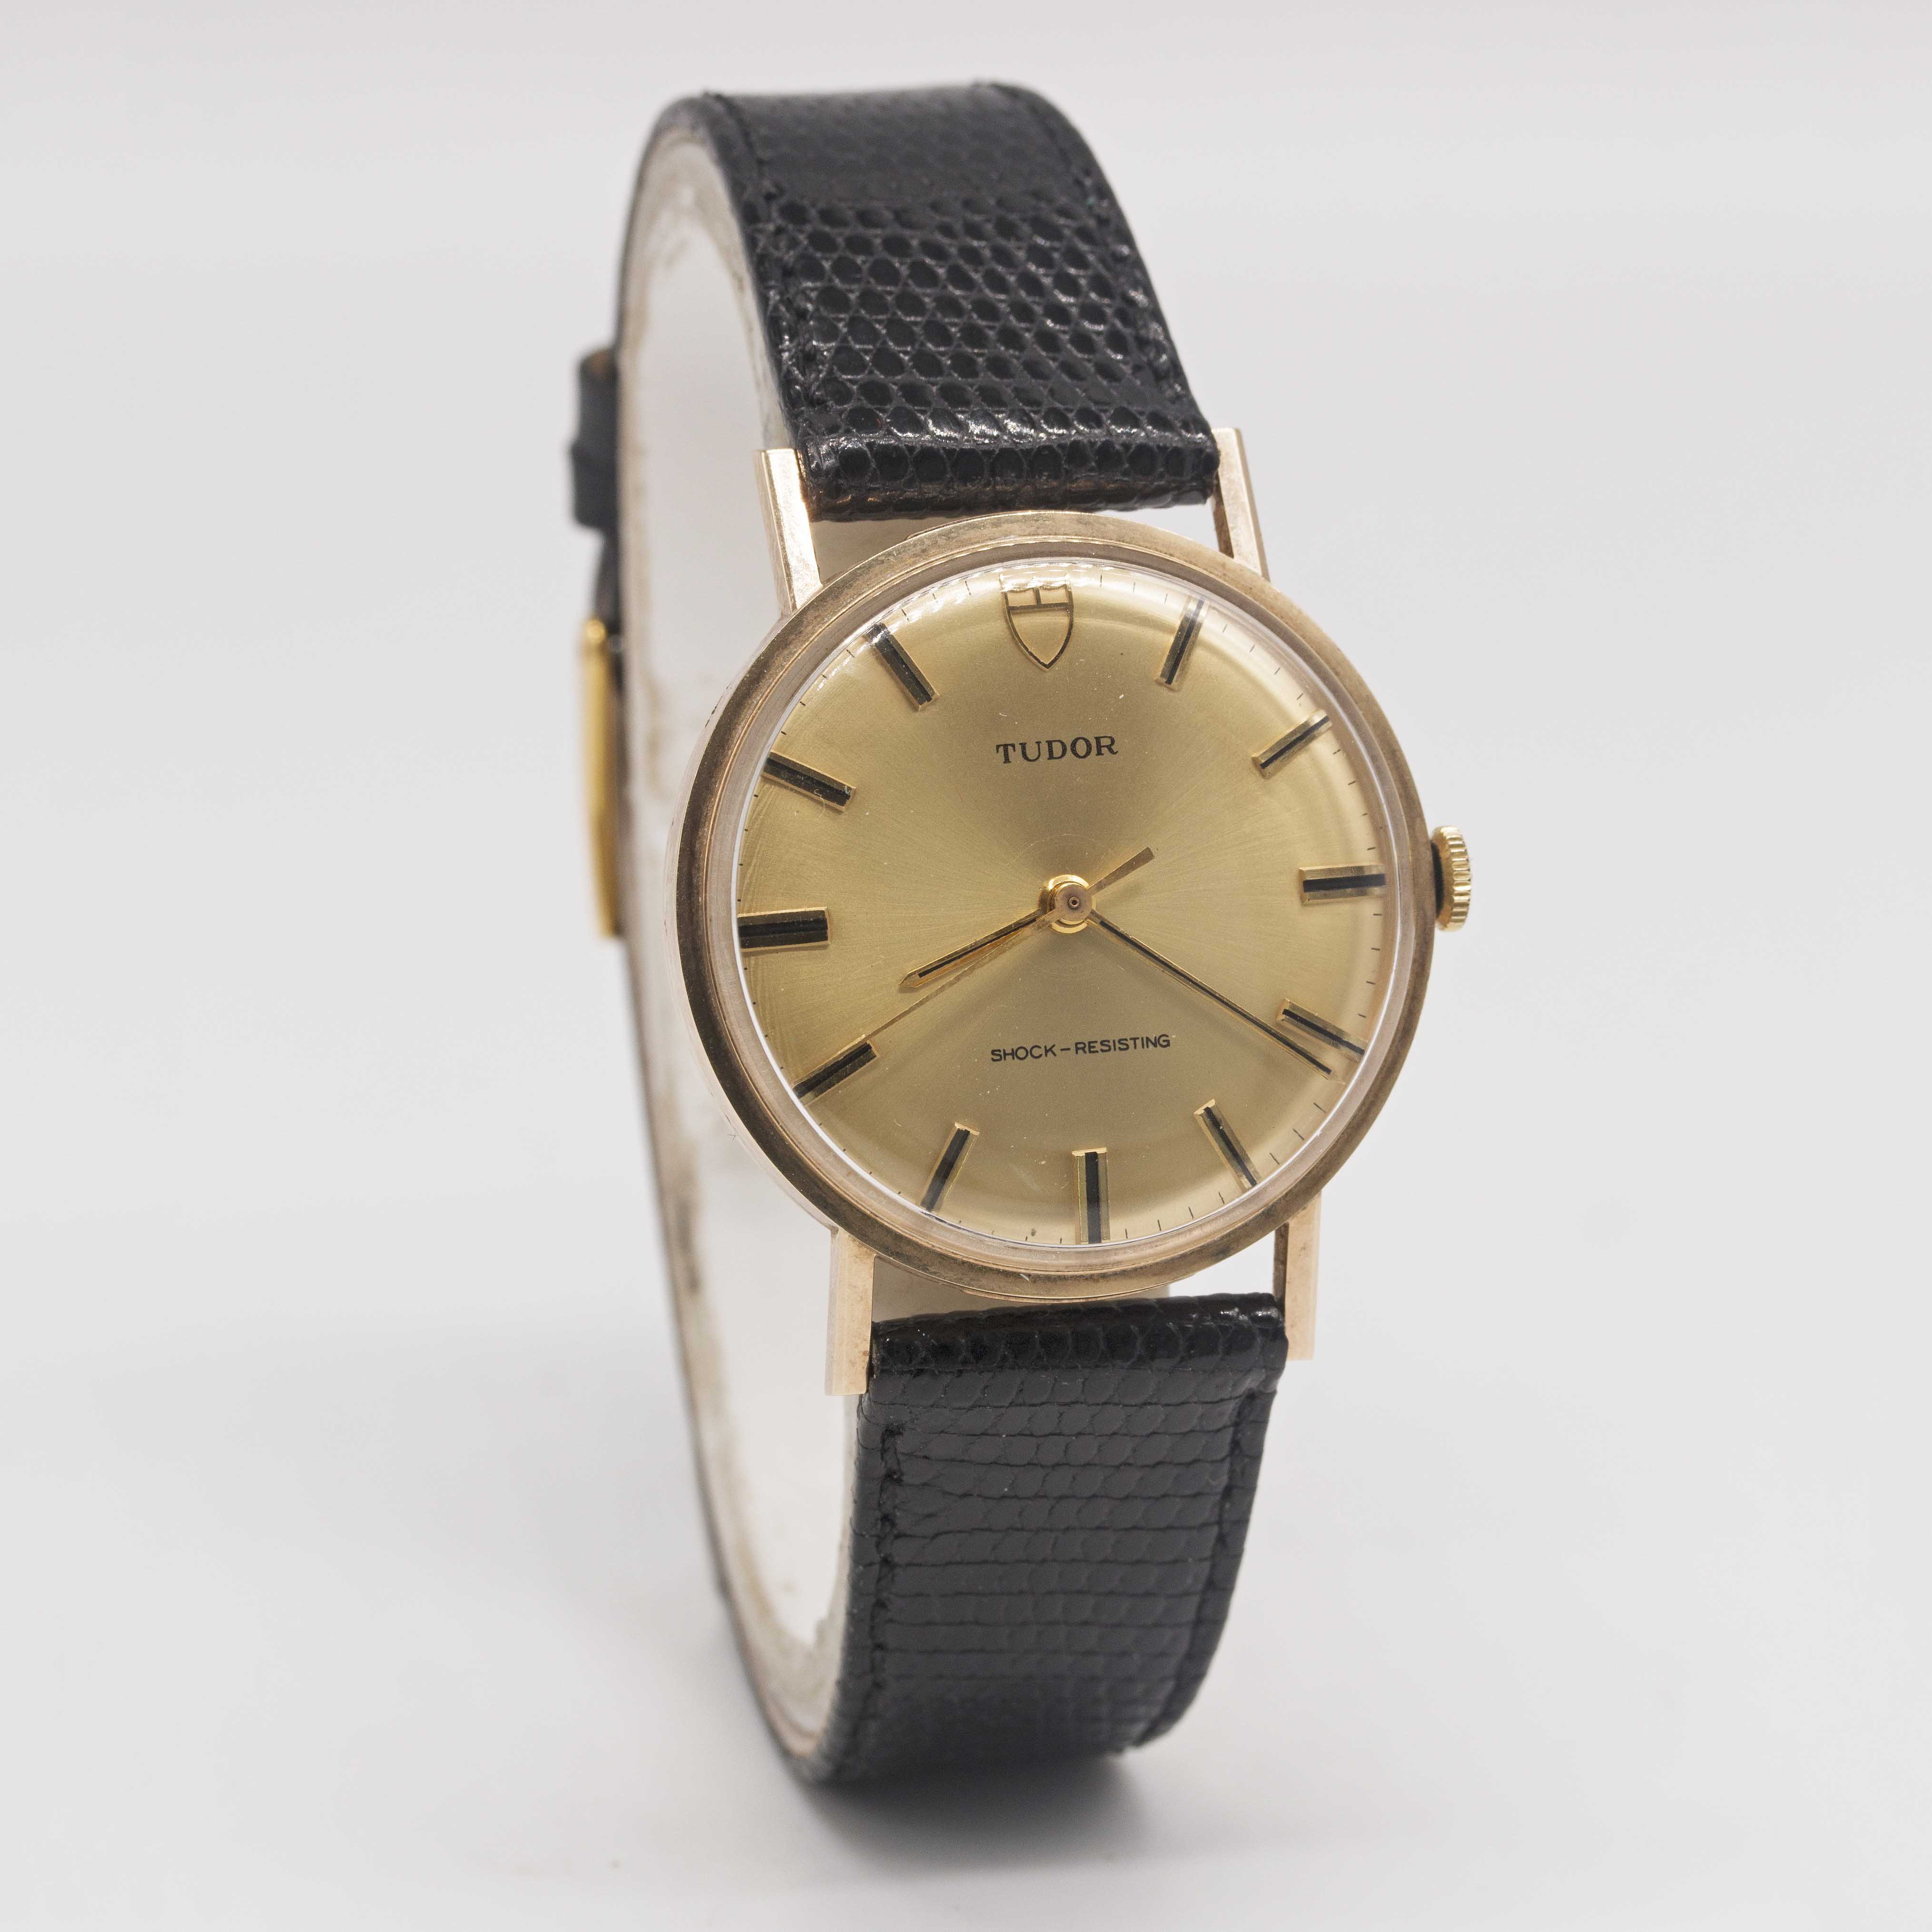 A GENTLEMAN'S 9CT SOLID GOLD ROLEX TUDOR SHOCK RESISTING WRIST WATCH CIRCA 1969, WITH CHAMPAGNE - Image 4 of 10